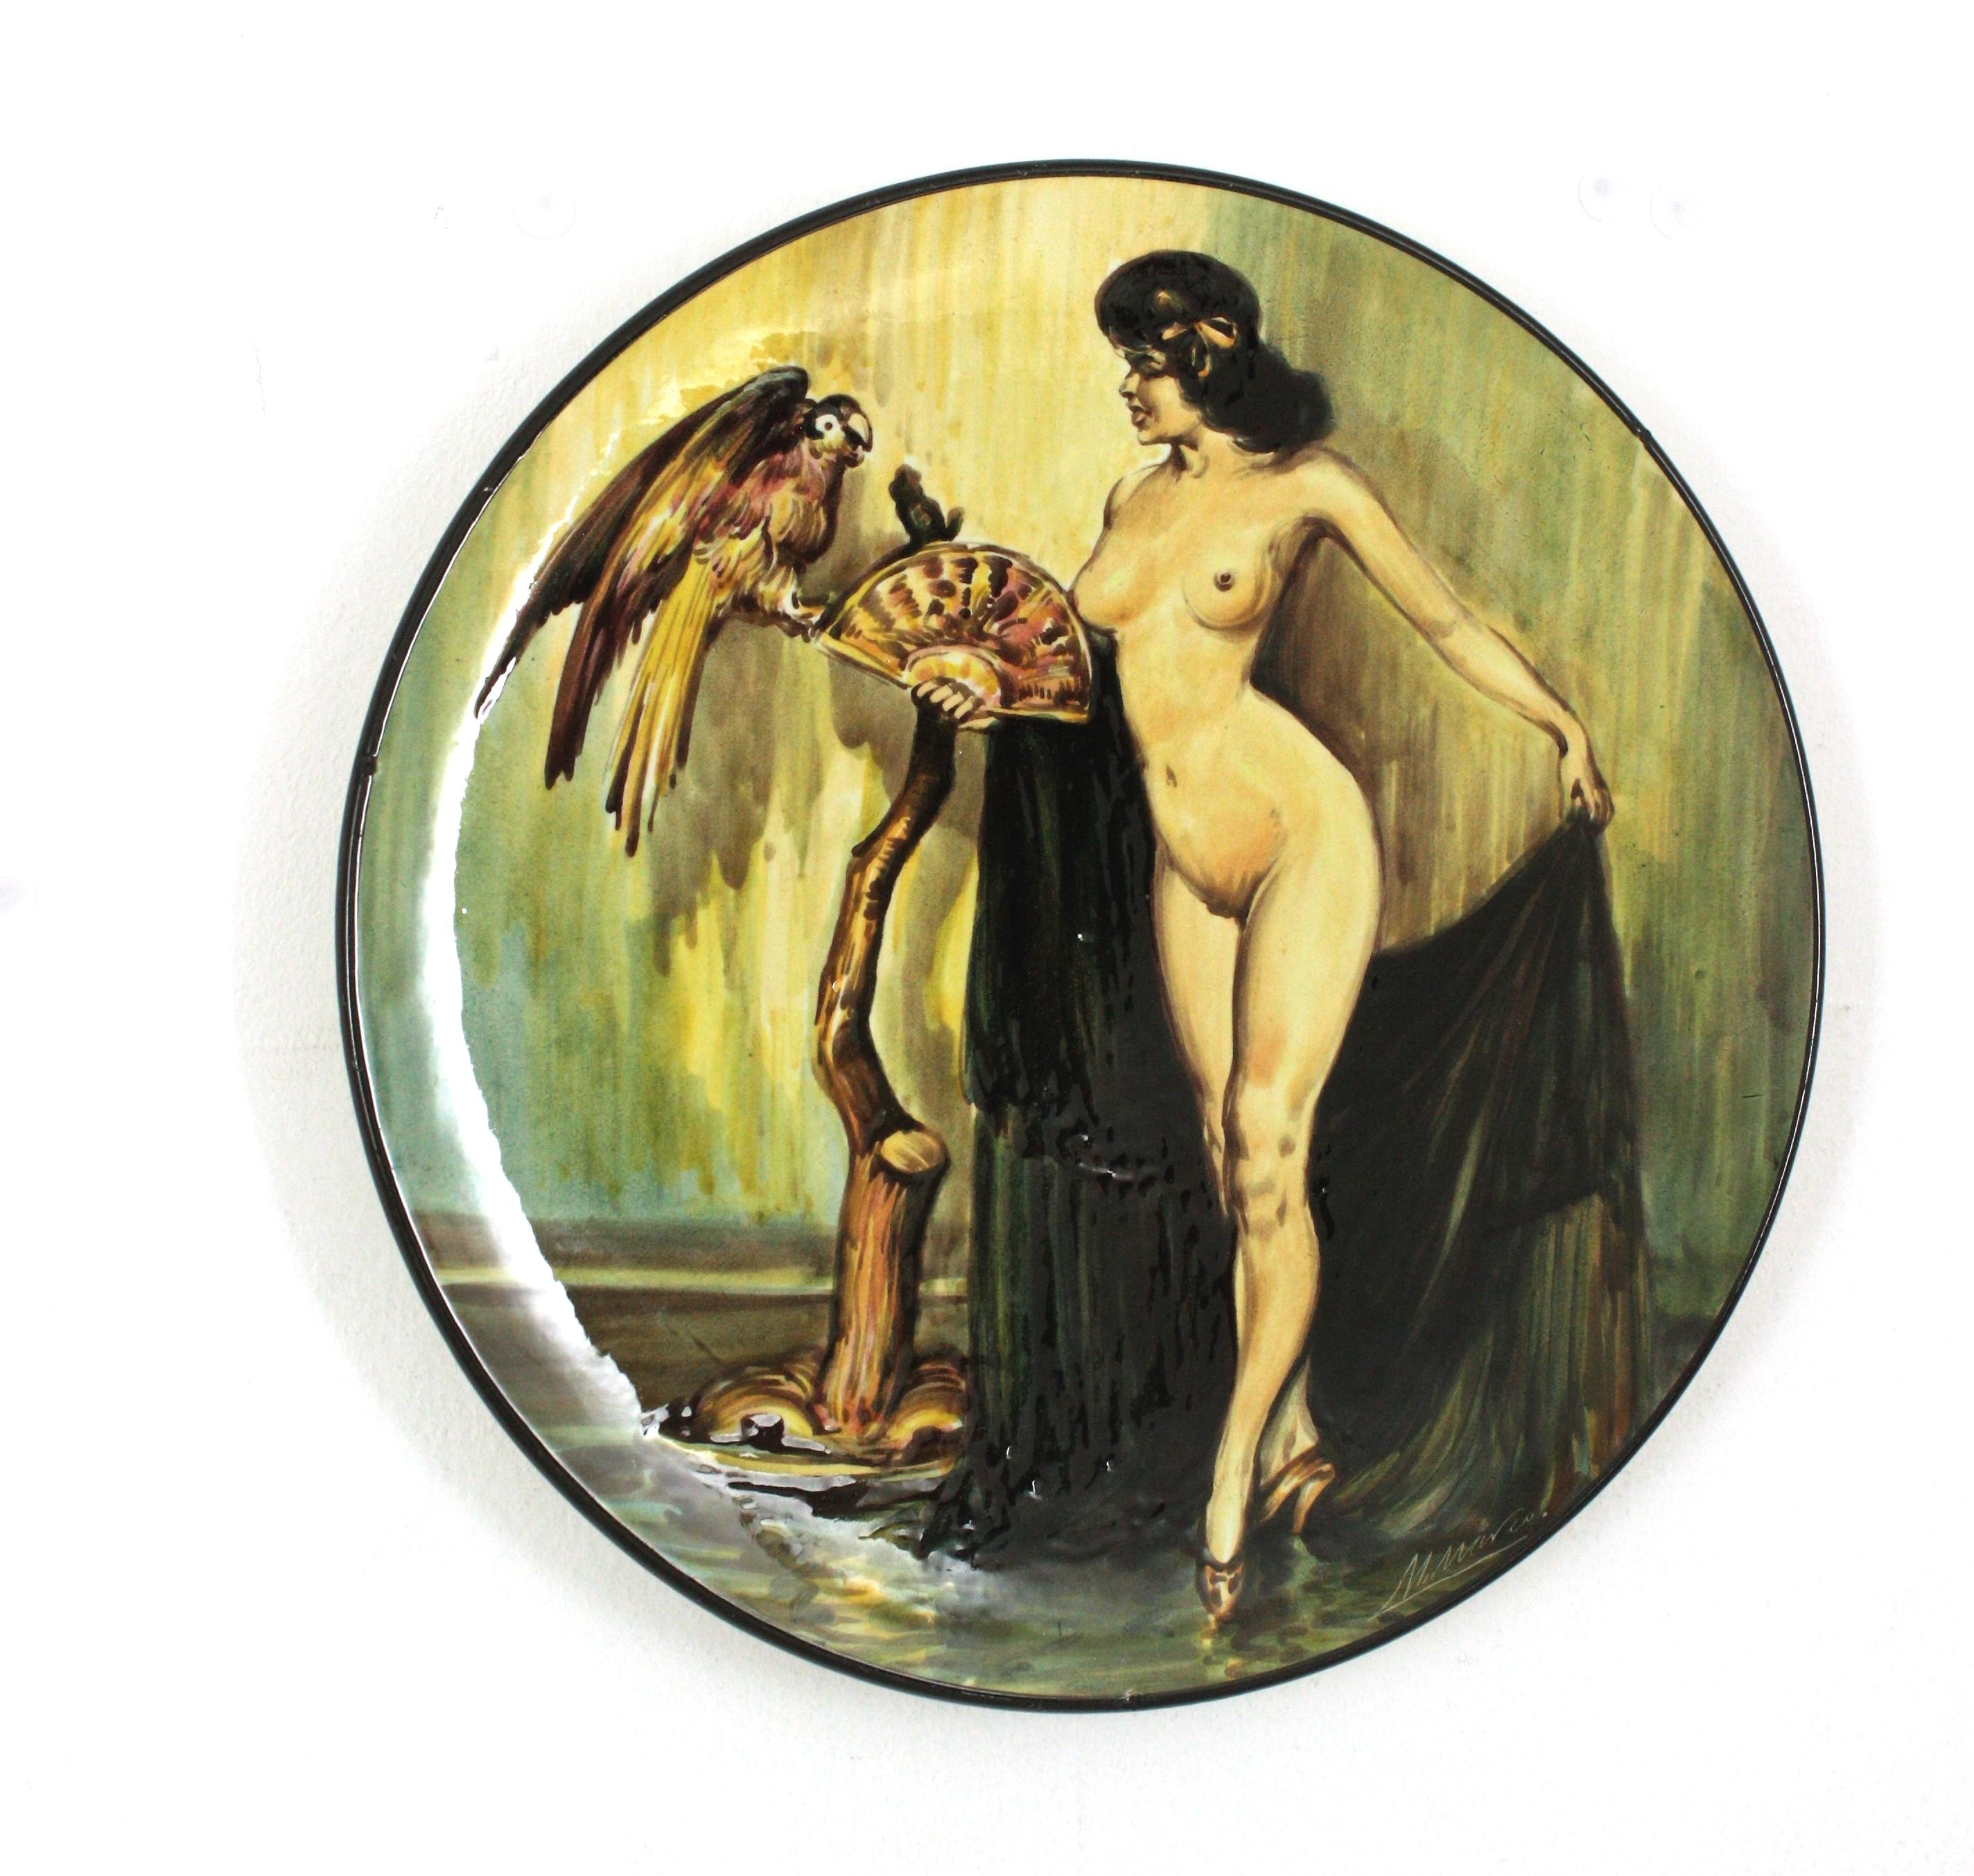 Hand-painted nude woman ceramic wall plate, Spain, 1950s
Gipsy naked woman with parrot
Signed M Marco at bottom right side
Marked at the back part: 'Gitana Desnuda'- I.Zuloaga- Pintado a mano, España.

This hand-painted ceramic plate is inspired on